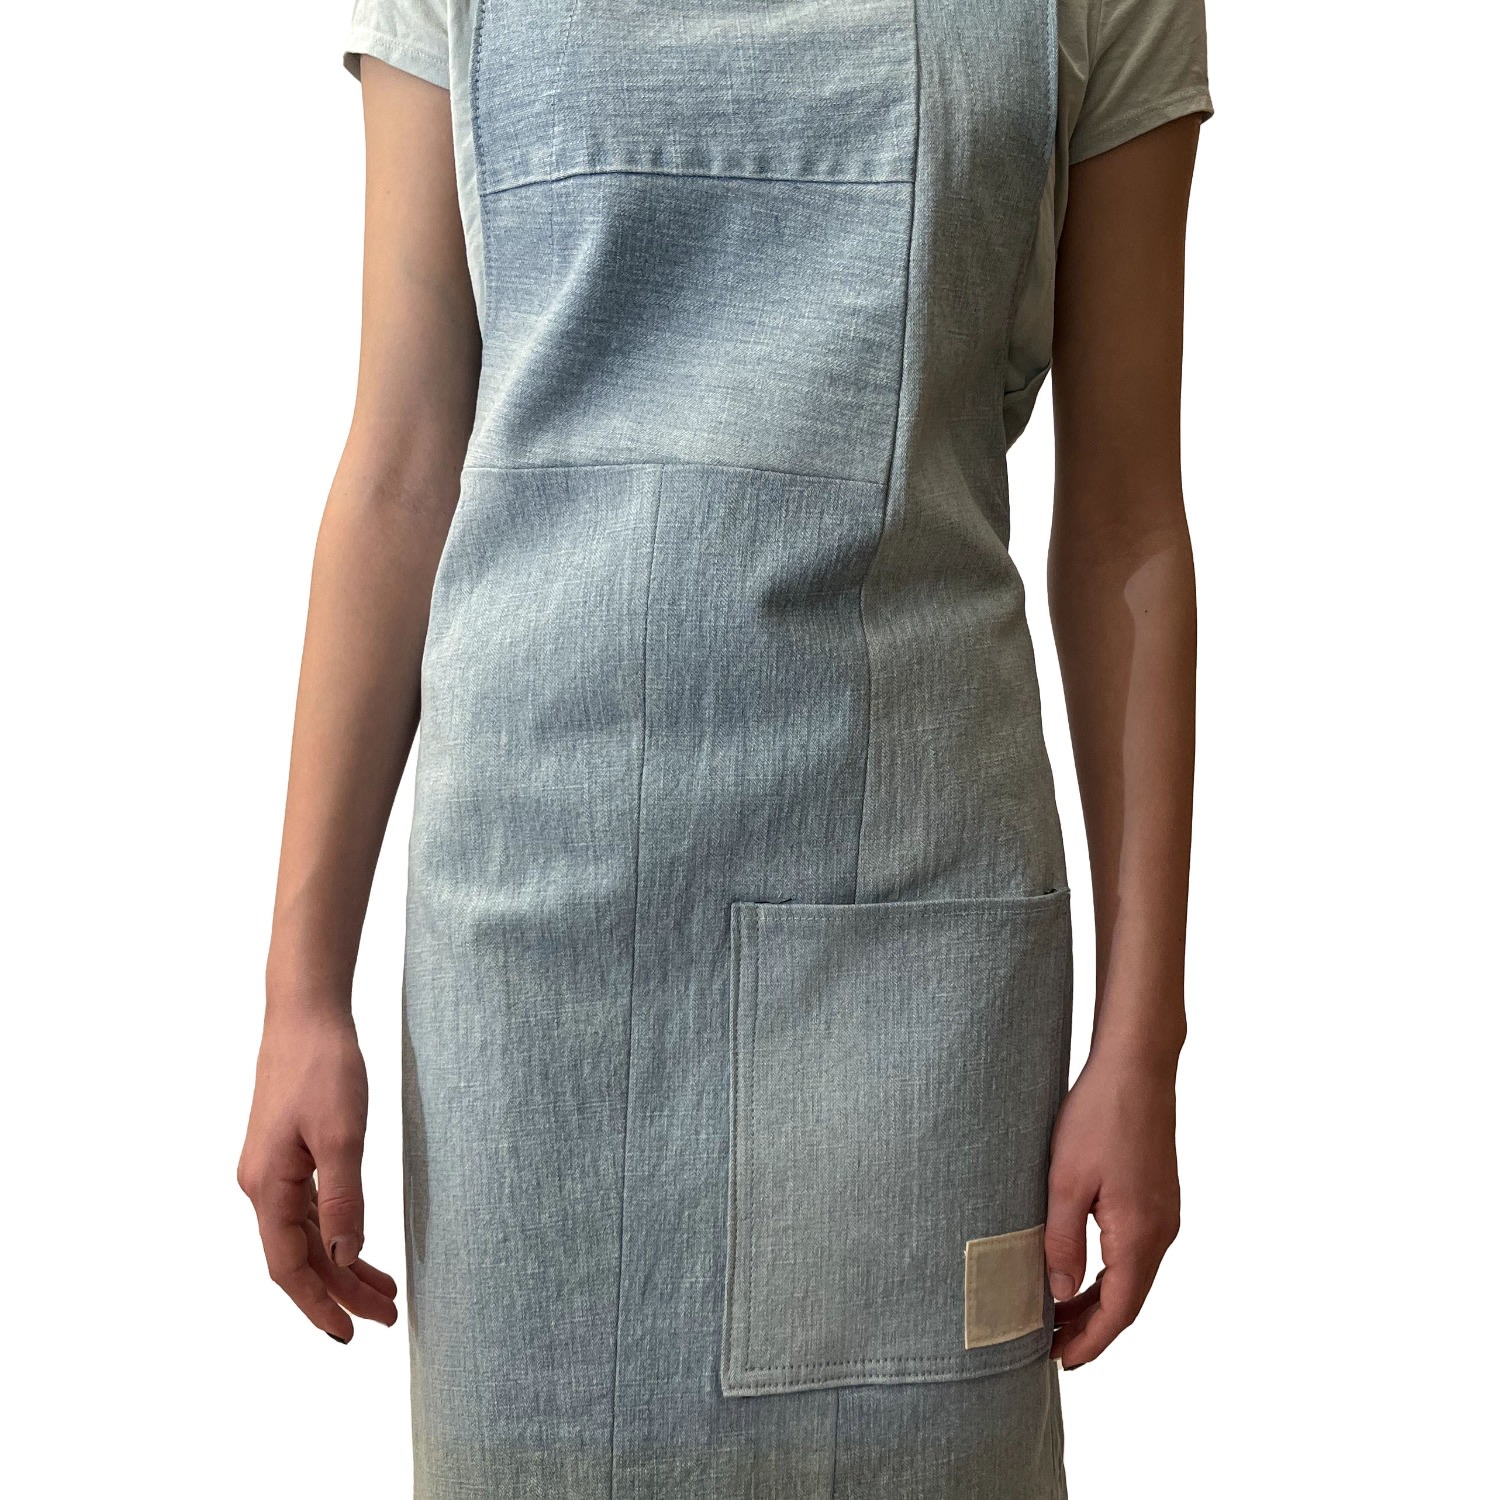 Blue Upcycled Denim Adult Apron One Size Park + Coop